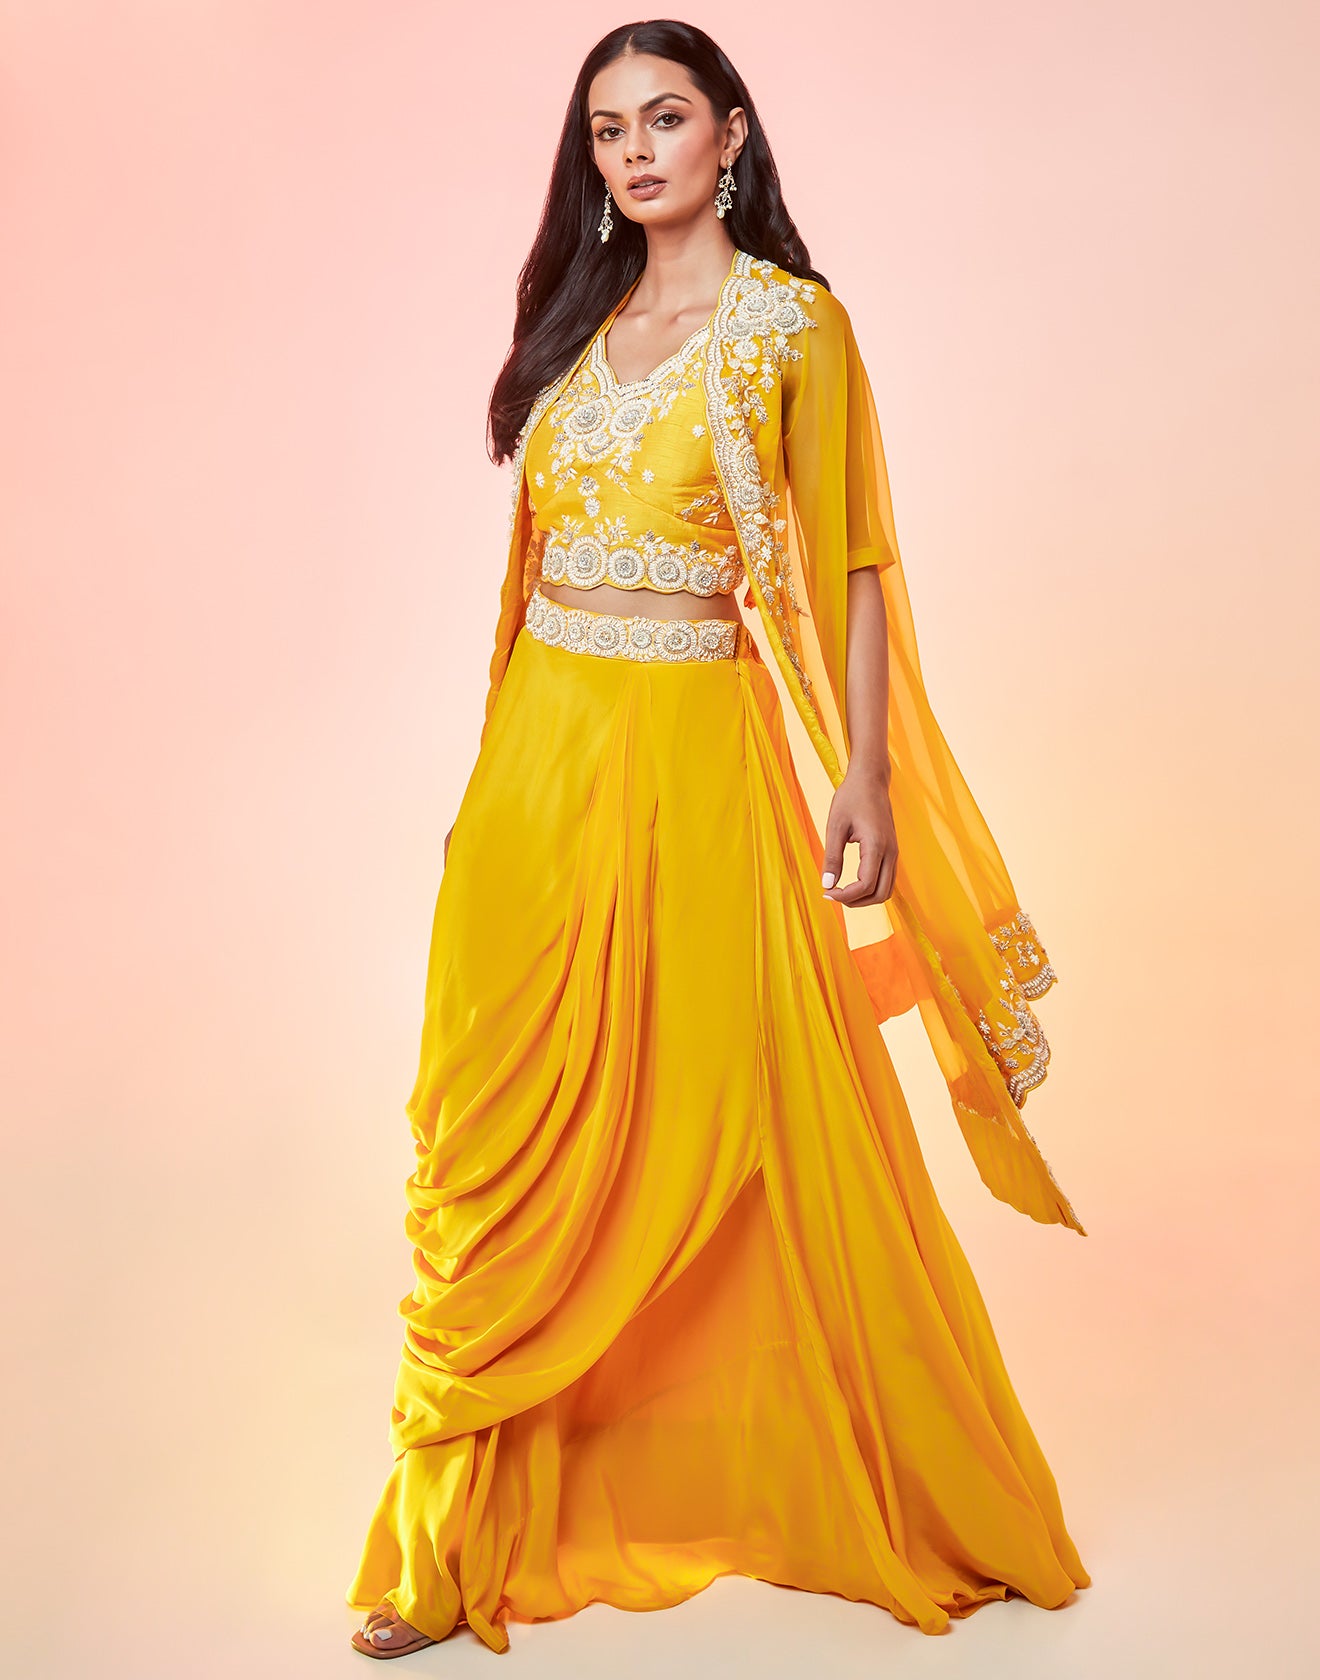 Canary Yellow Draped Fusion Set With Cape Sleeves And Embroidered In Ivory